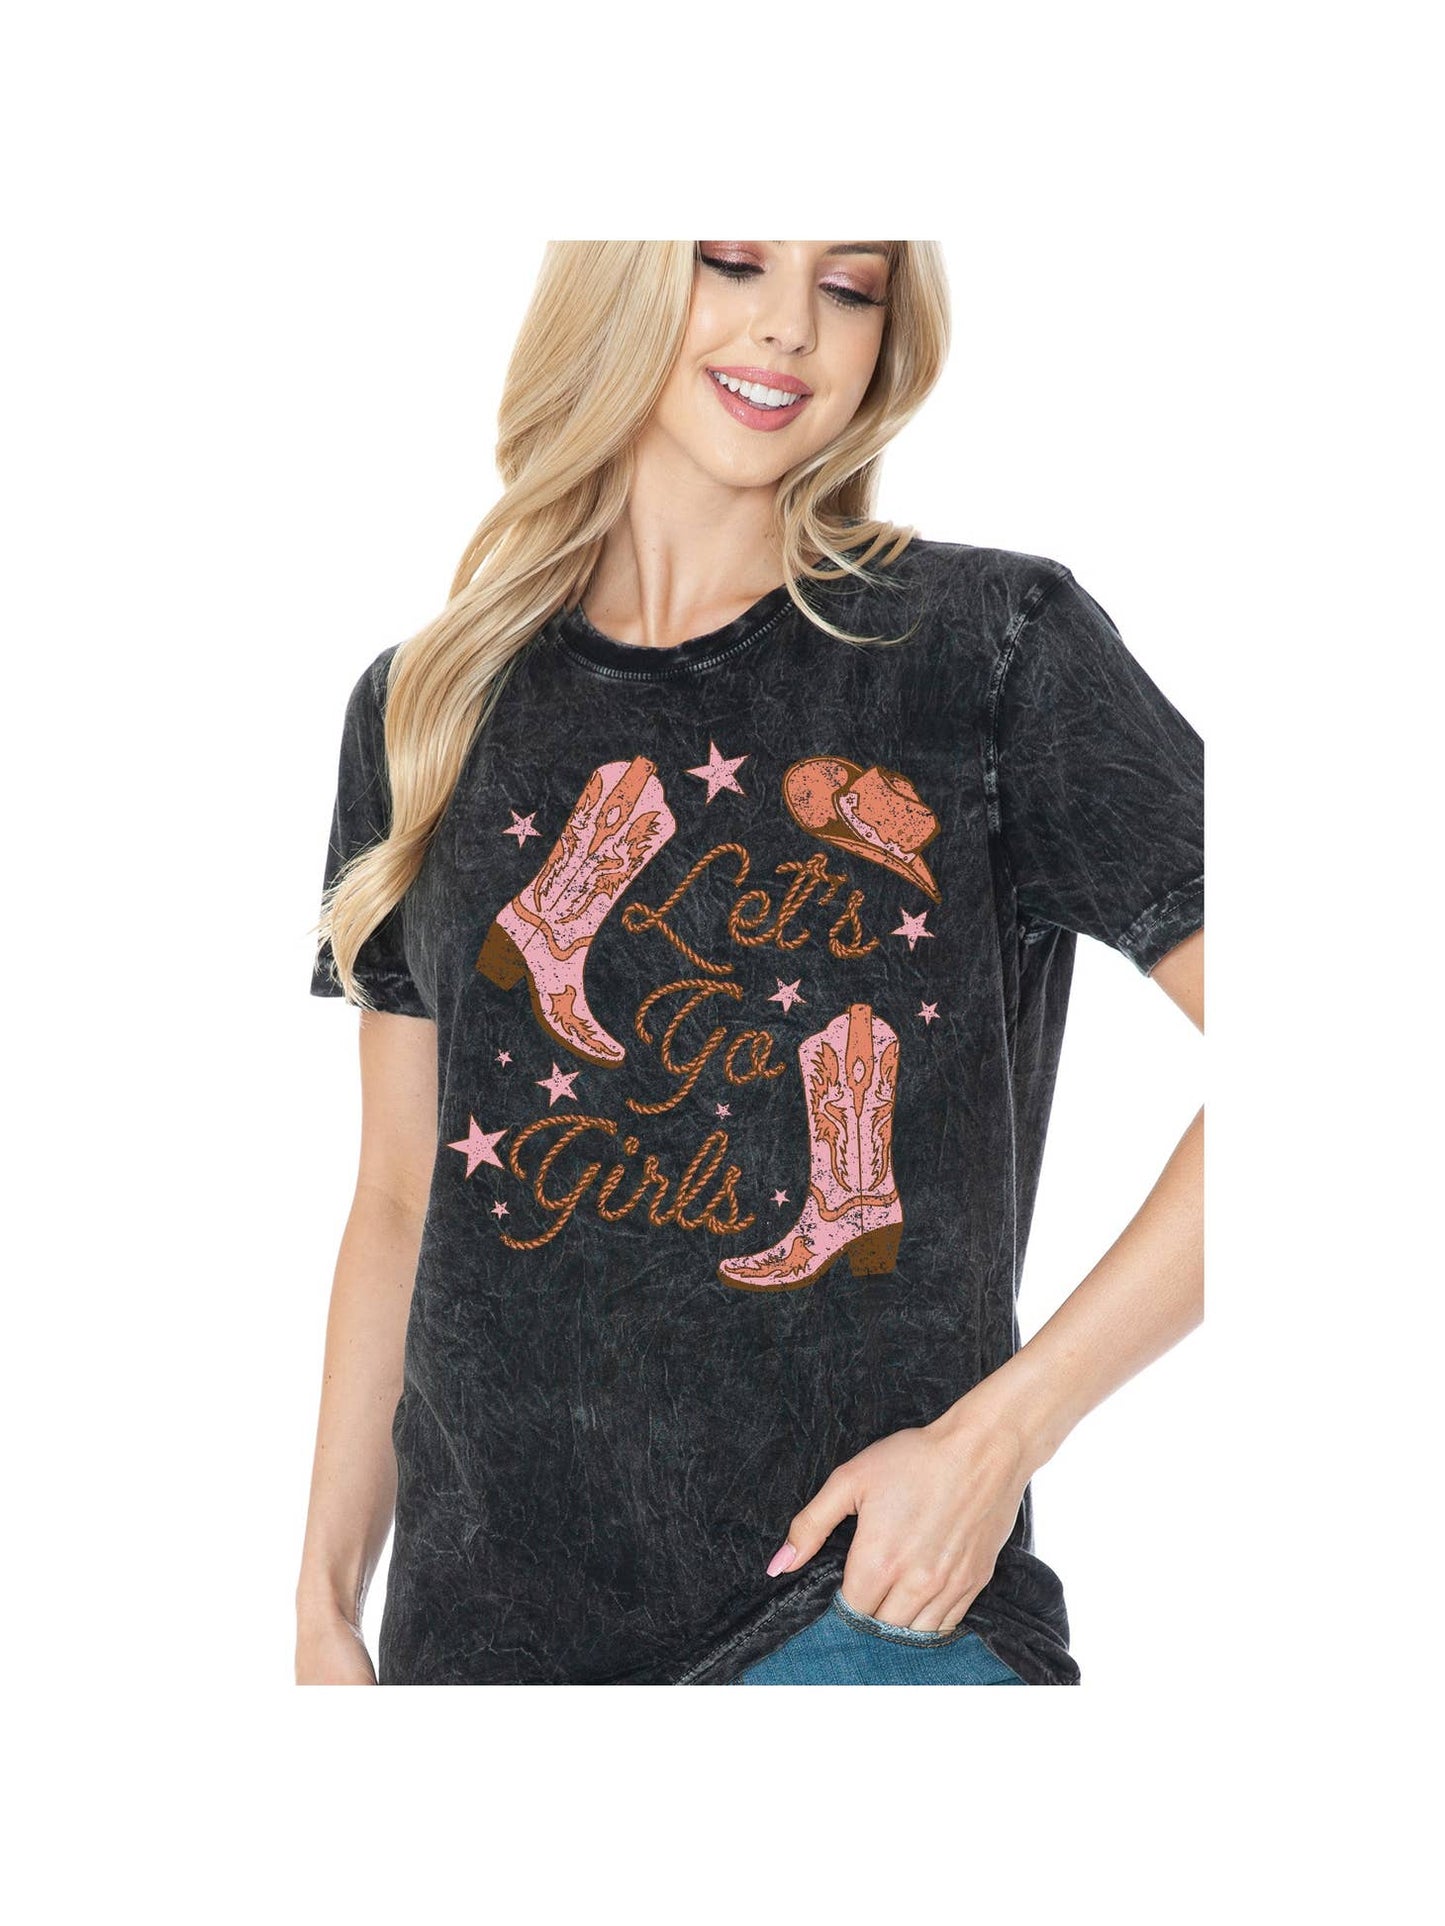 Lets Go Girls Mineral Washed Graphic